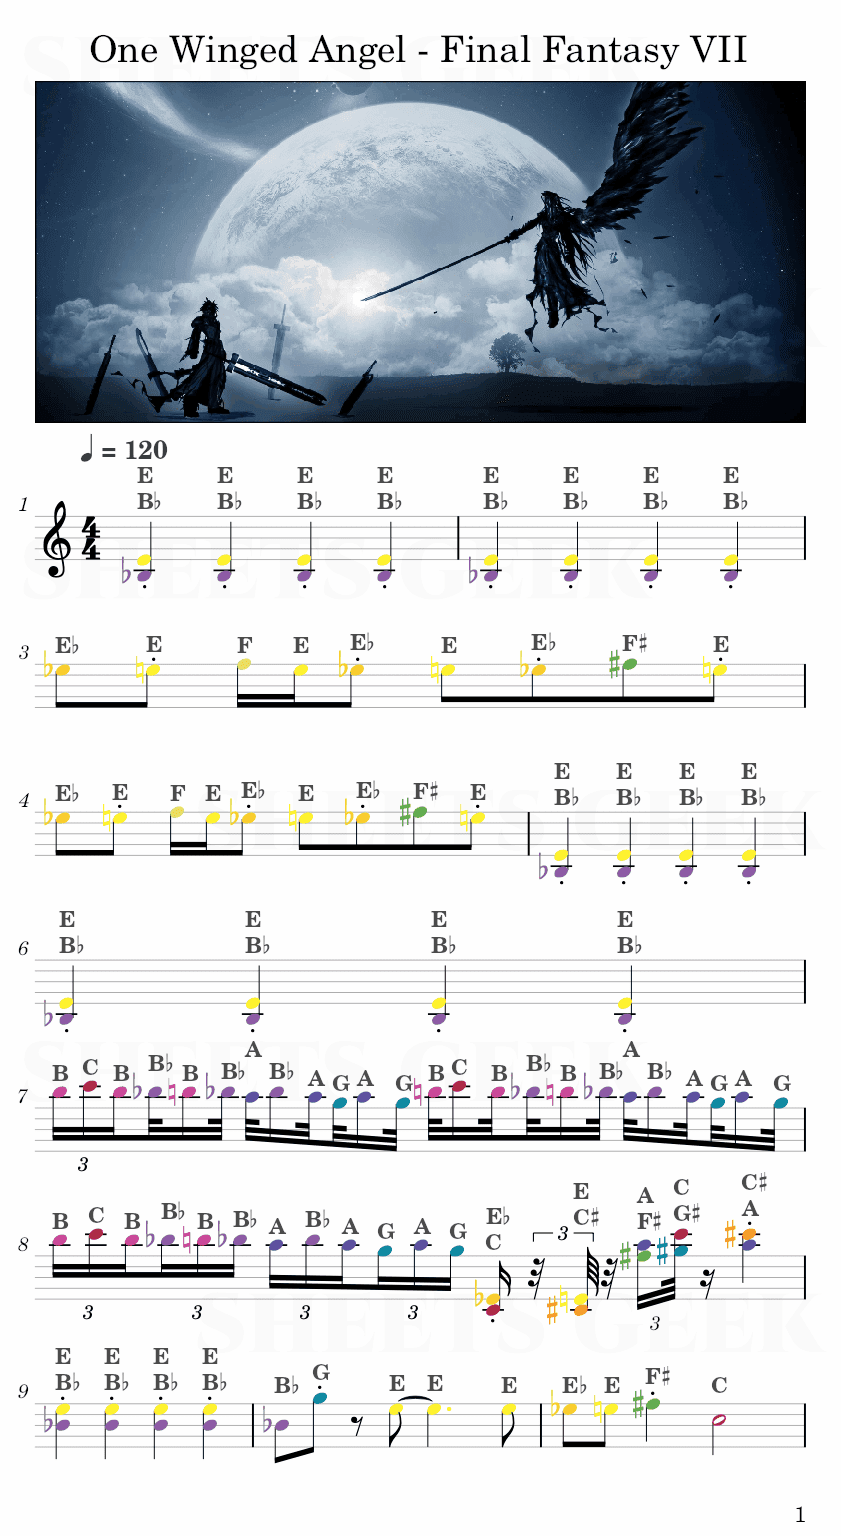 One Winged Angel - Final Fantasy VII Easy Sheet Music Free for piano, keyboard, flute, violin, sax, cello page 1